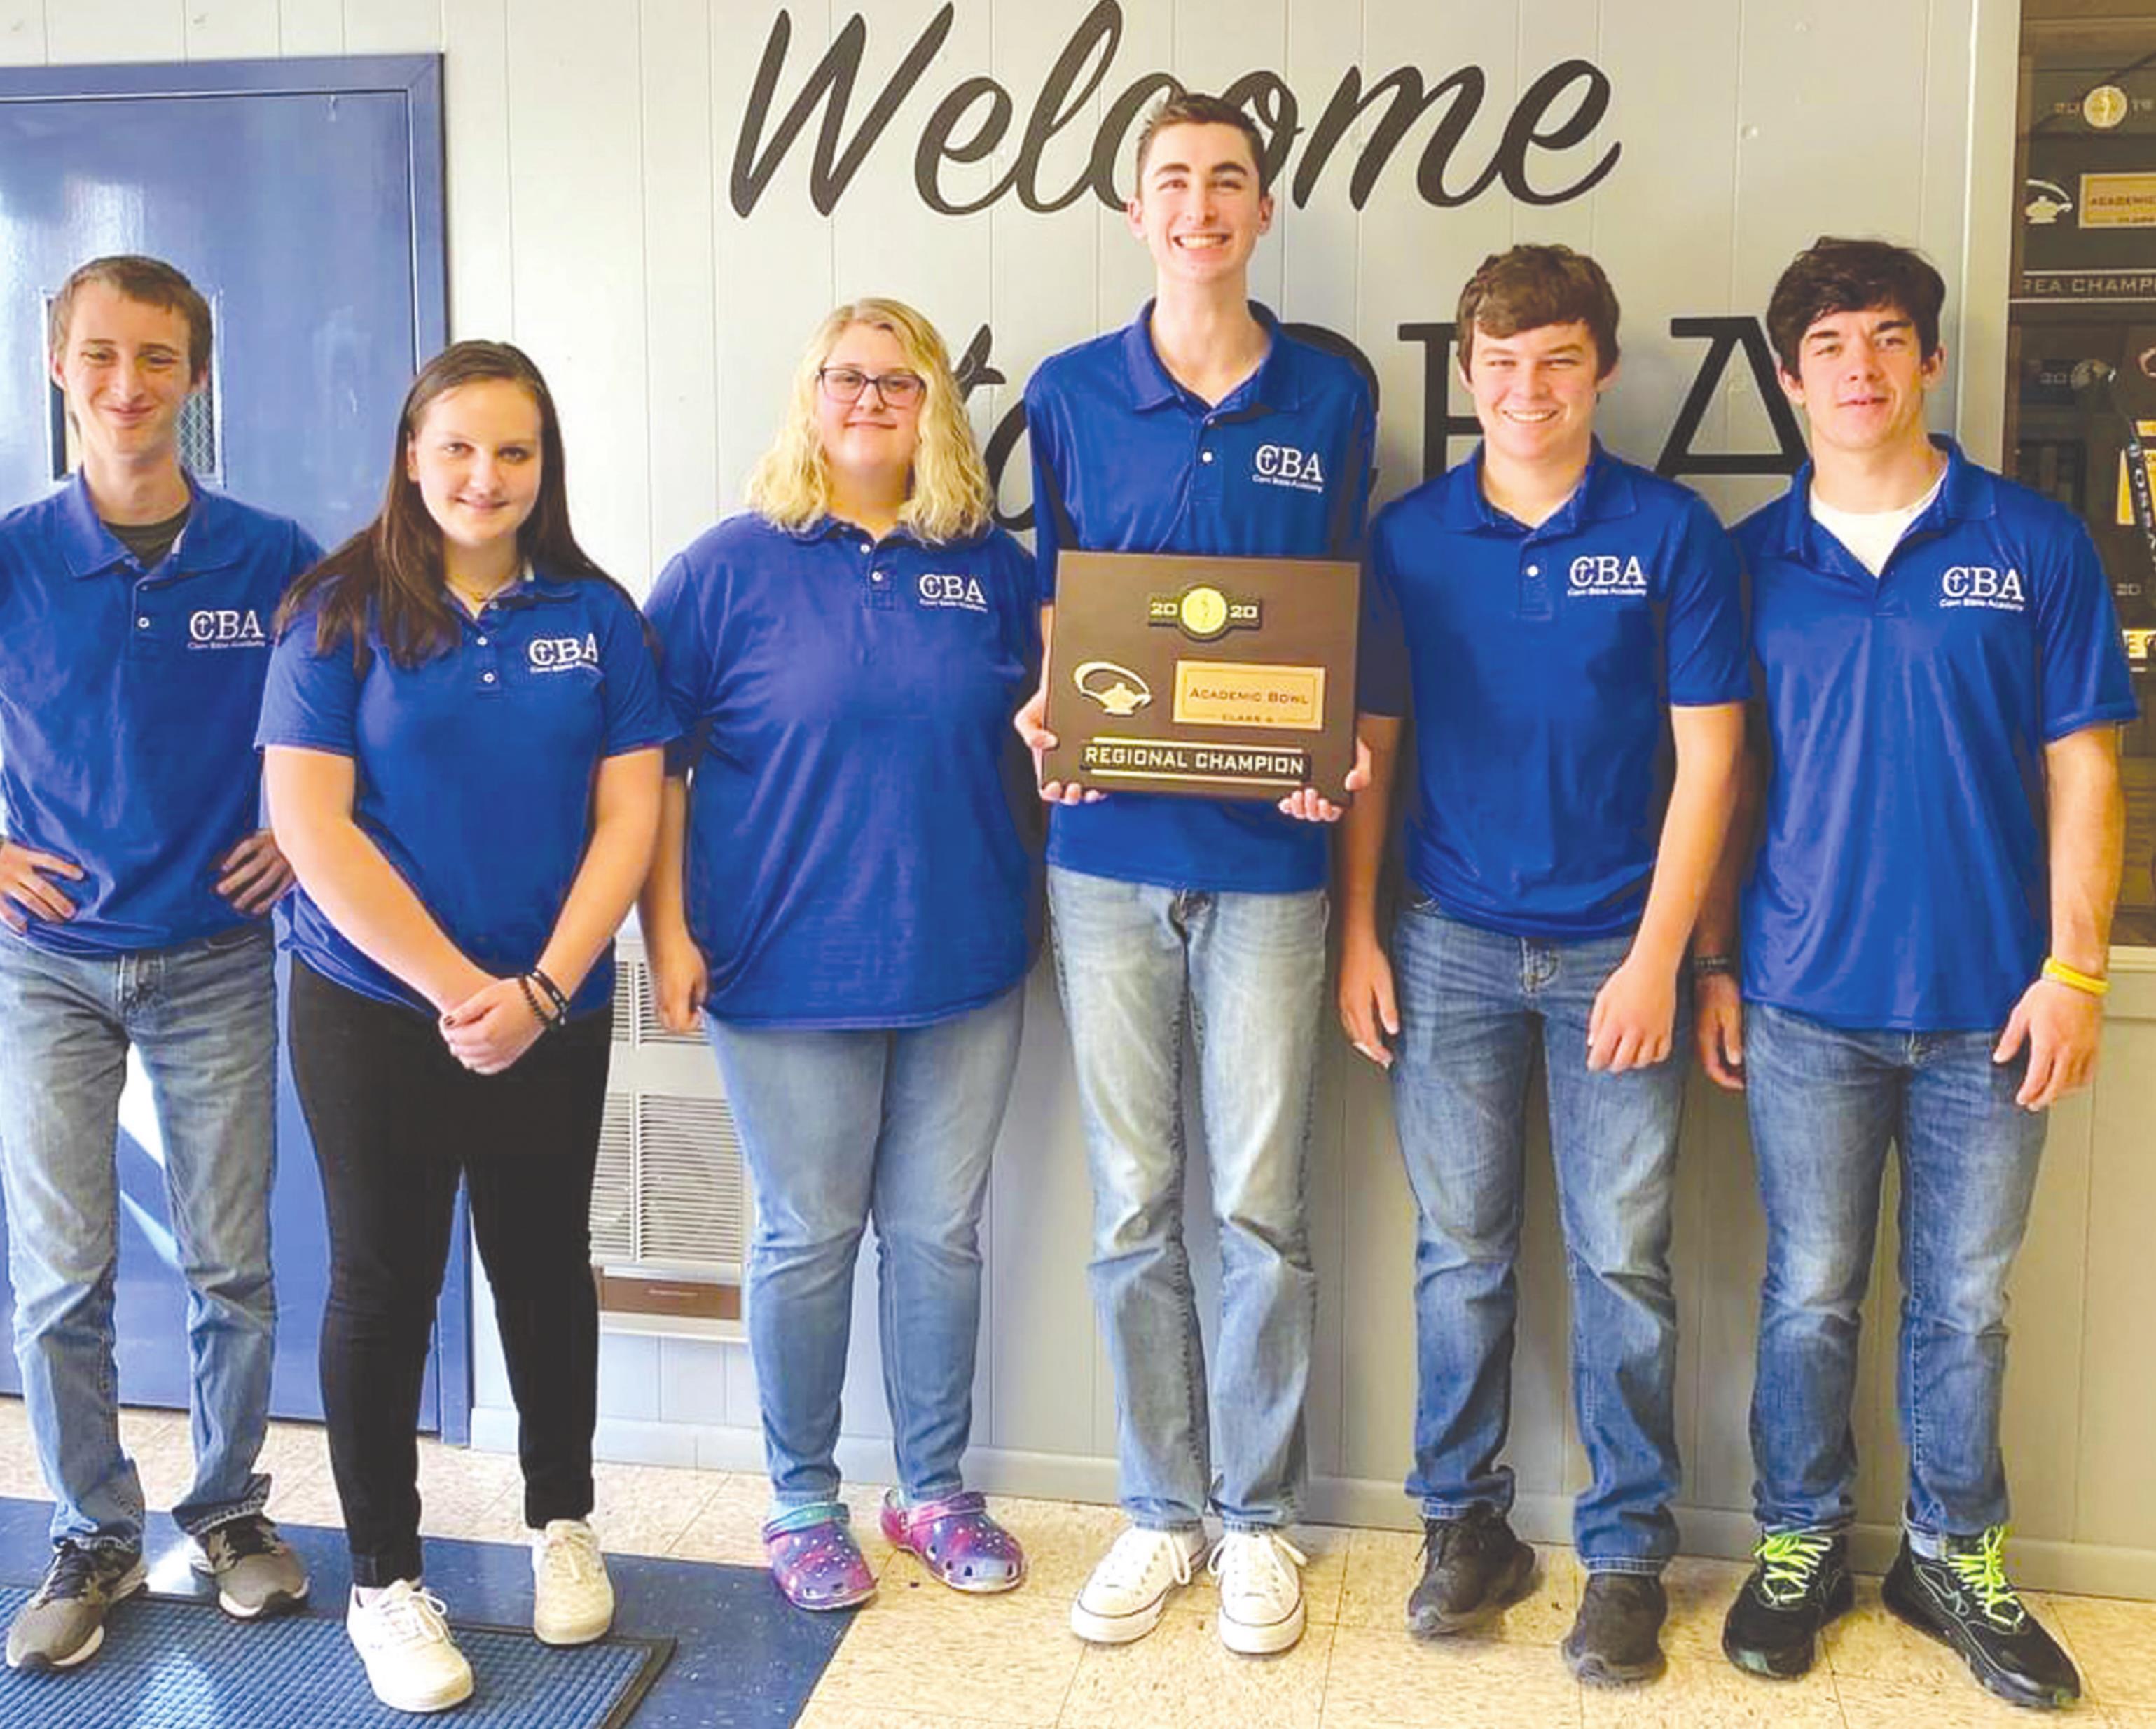 Corn Bible Academy wins Regional Academic Team Competition Saturday. Pictured from left is Jaiden Dobbs, of Cordell, Isaiah Thiessen, of Cordell, Kennedy Listak, of Clinton, Harrison Penner, of Weatherford, Phillip Javorsky, of Weatherford, and Brendan Miller, of Thomas. Provided